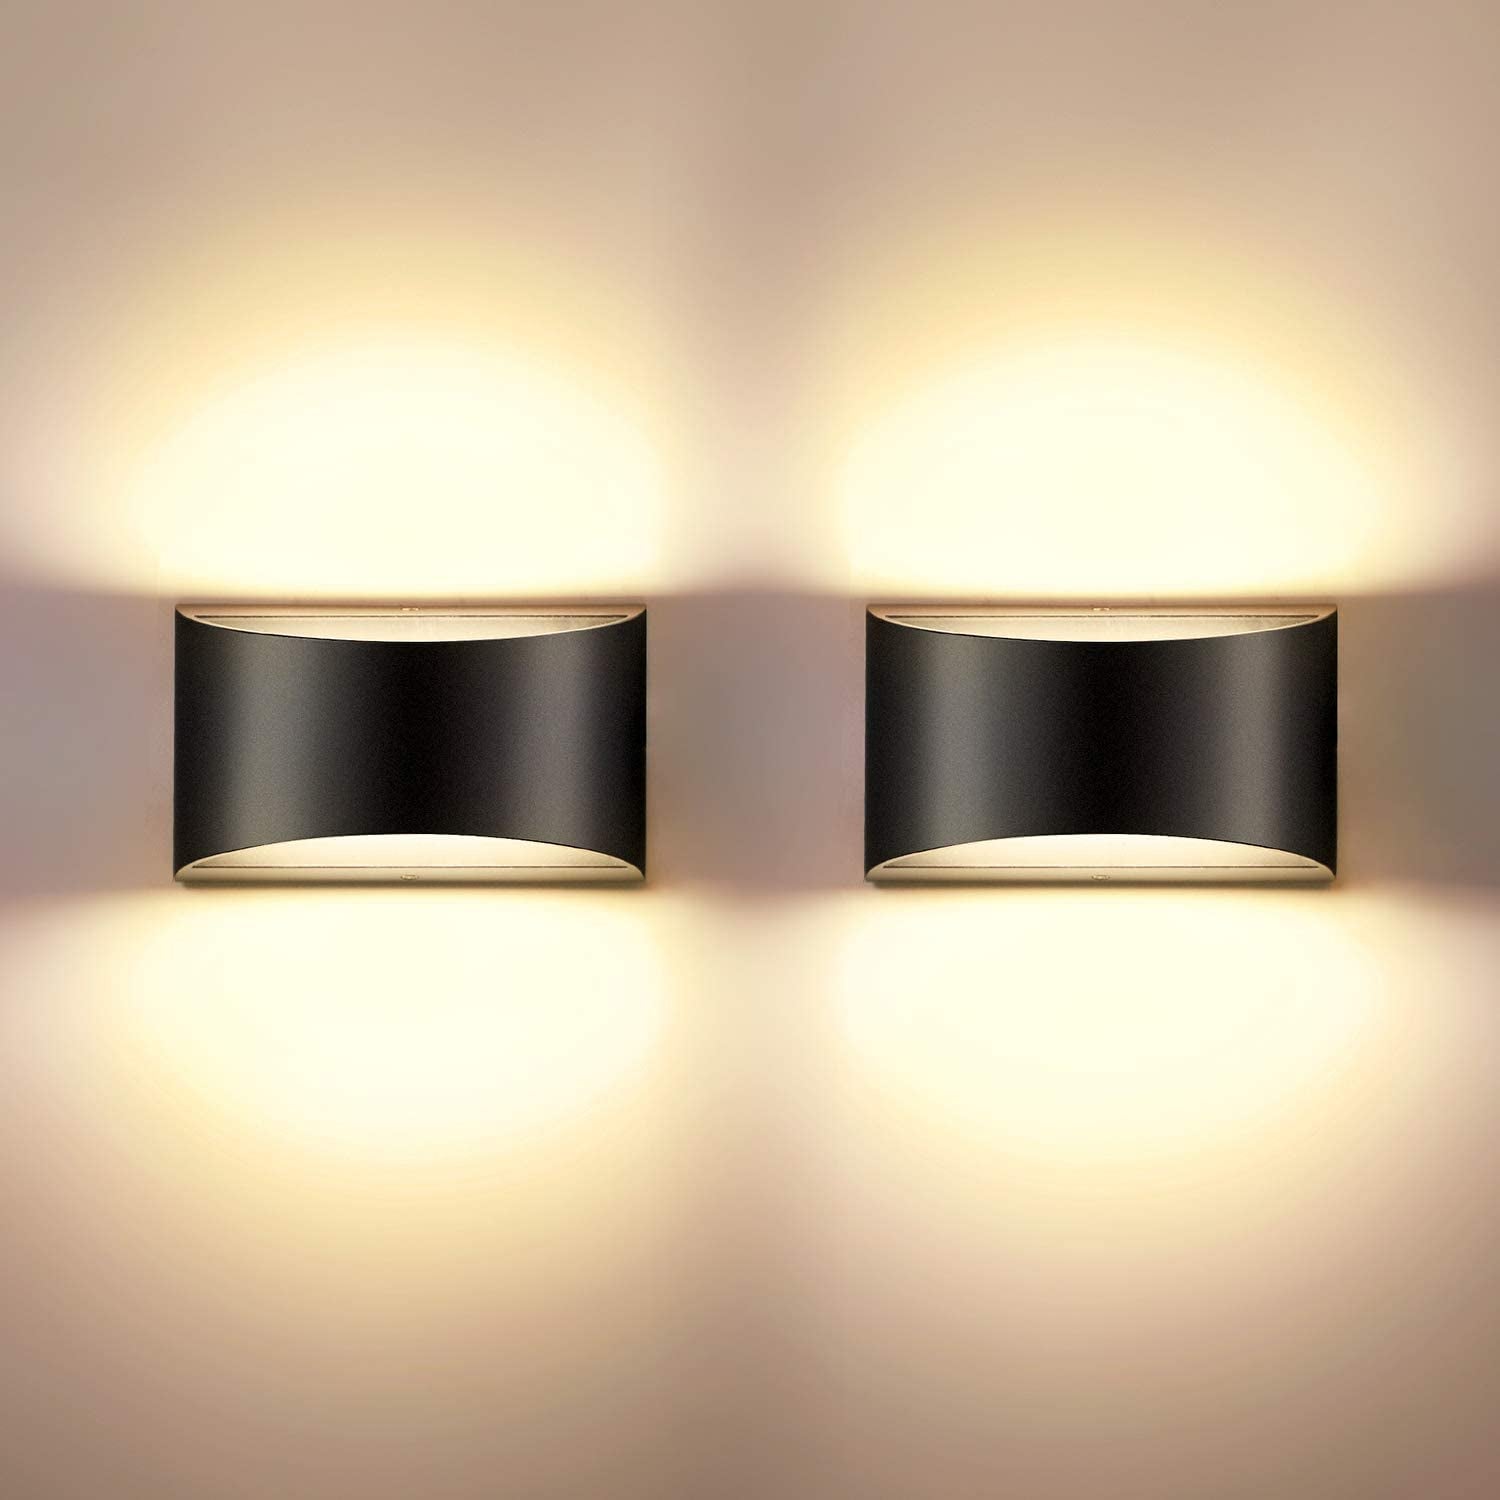 Indoor Dimmable Wall Sconces Sets of 2, Modern Black Led up down Wall Lamp, 12W Indoor Hallway Wall Light Fixtures for Living Room, Stair, Bedroom, Warm White,2 Pack